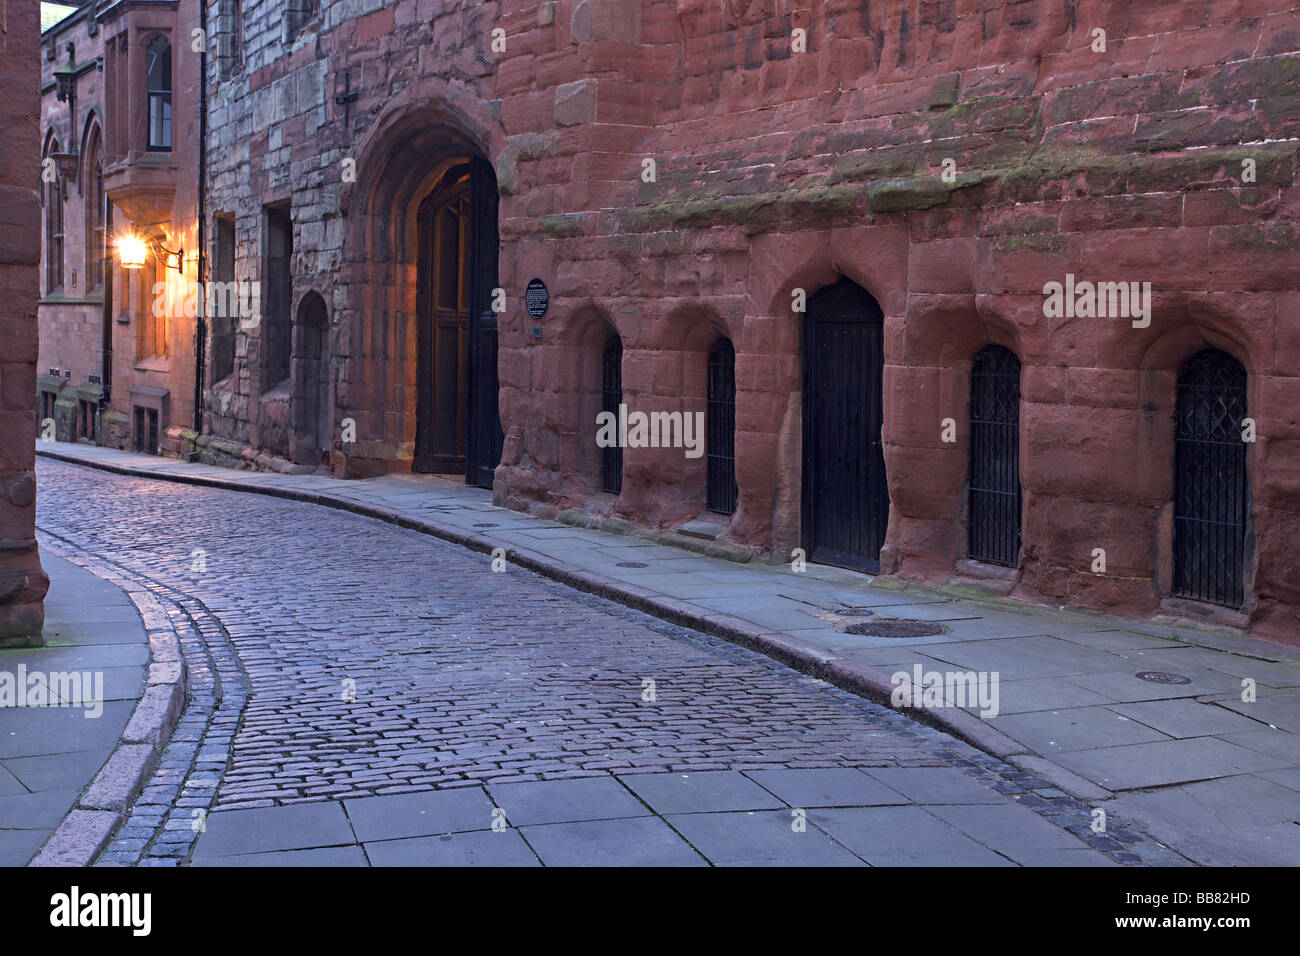 St Mary's Guildhall entrance at Bayley Lane in Coventry, West Midlands of England, United Kingdom Stock Photo